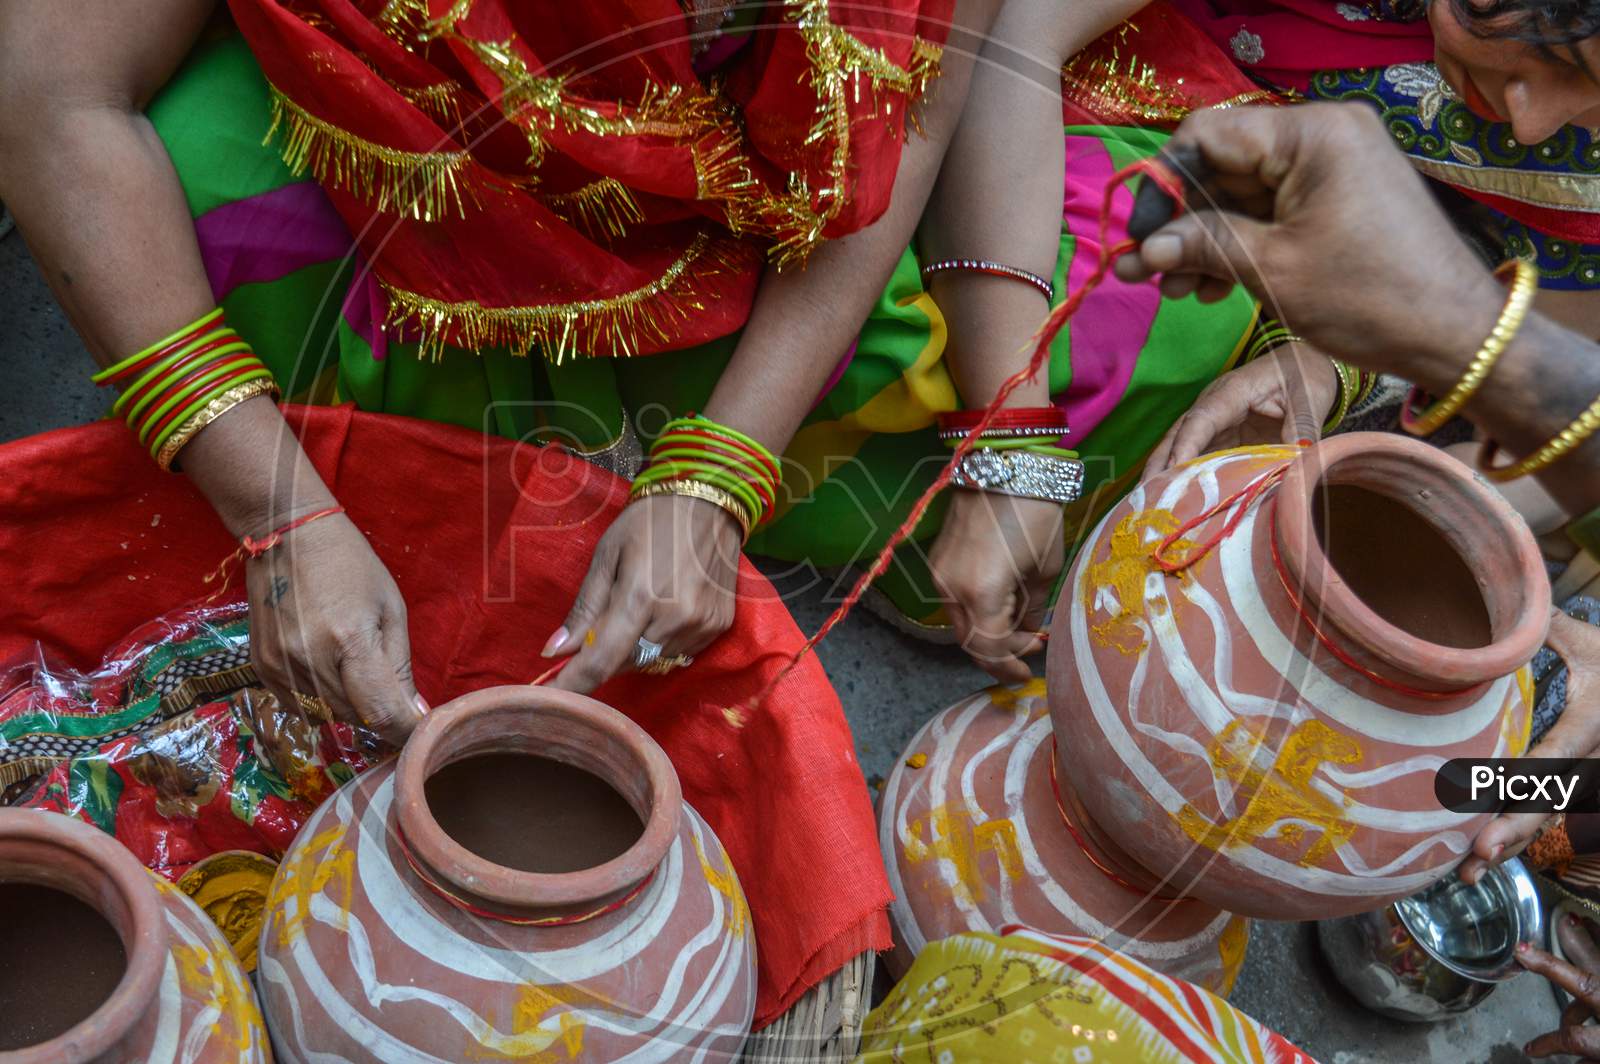 Lady Tie Thered On Clay Pot In Indian Weddings.